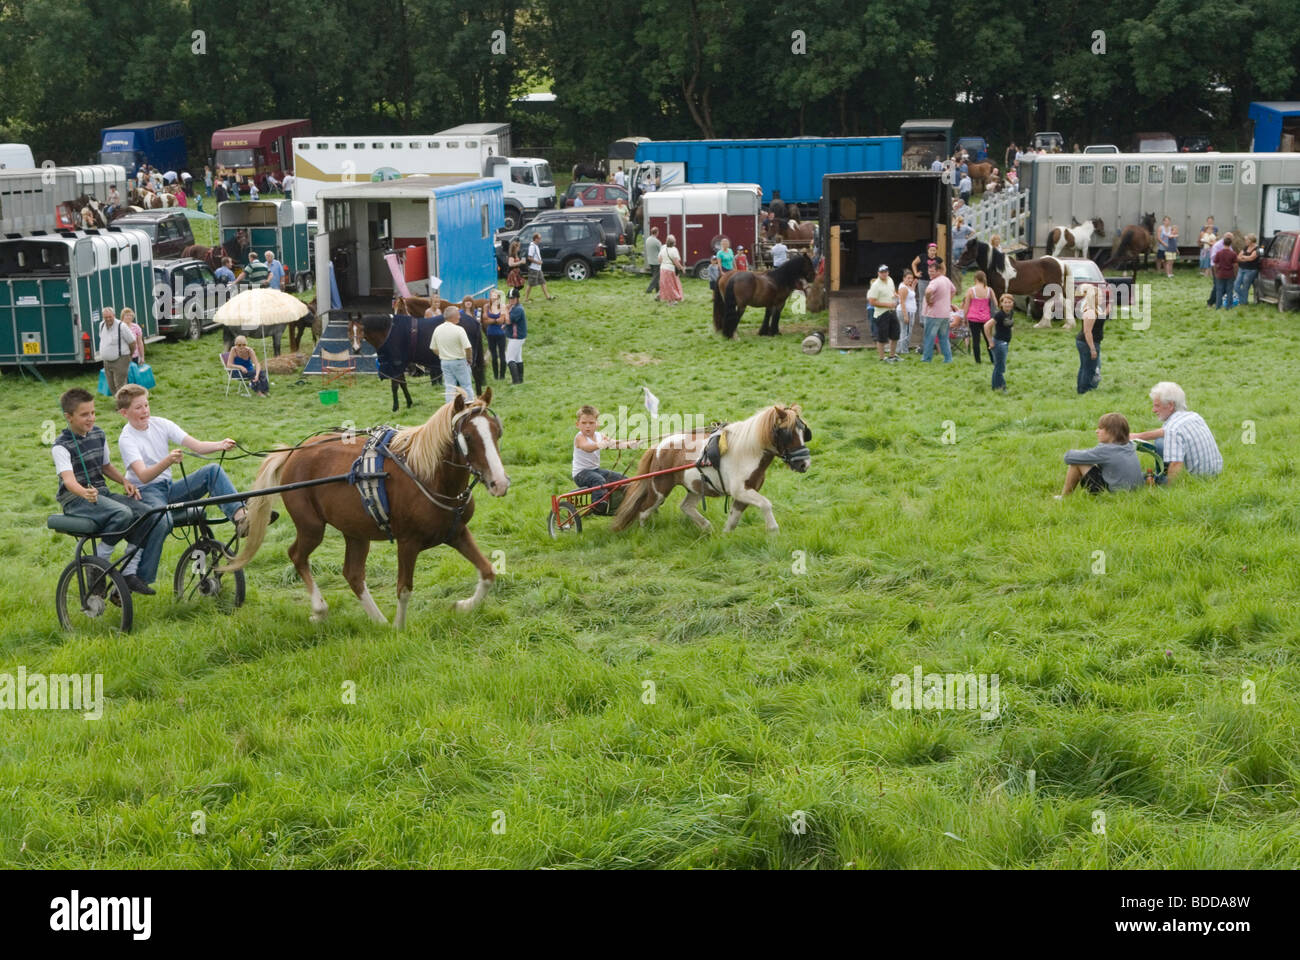 Priddy Horse Fair Somerset Uk  Young boys trotting racing each other.  2009 Pony and trap. Horse dealers with trailers HOMER SYKES Stock Photo